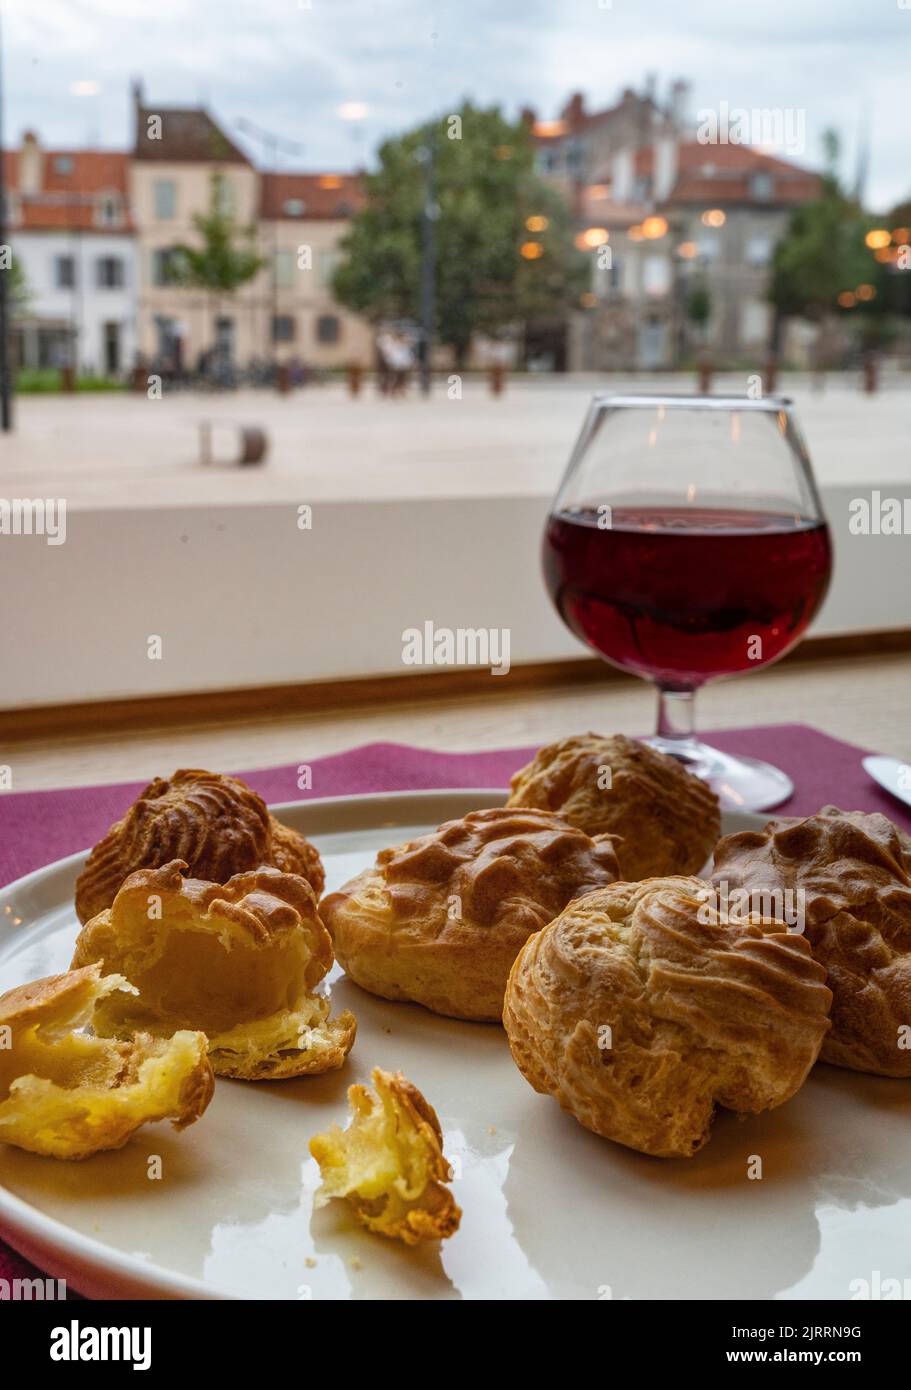 Savoury cheese choux and a glass of Pinot Noir: The typical aperitif is also served at the brassereie comptoir de la Cité at the Cité Internationale d Stock Photo